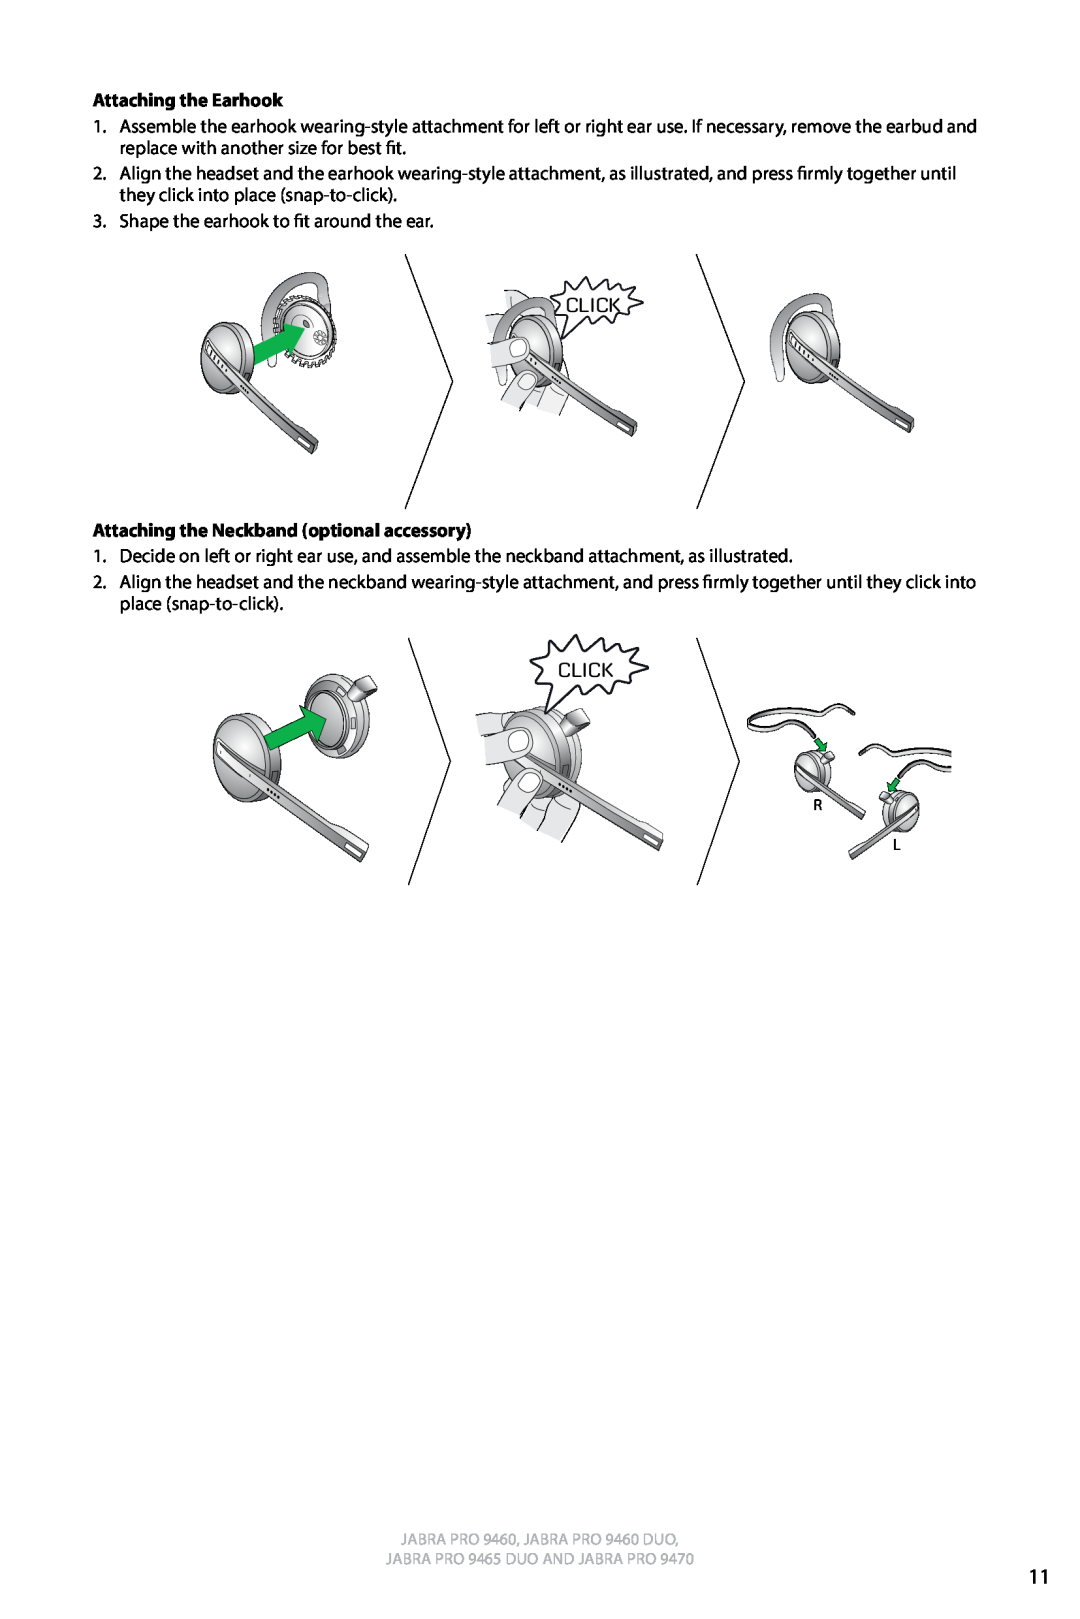 Jabra 9460 user manual Attaching the Earhook, Attaching the Neckband optional accessory, Click 